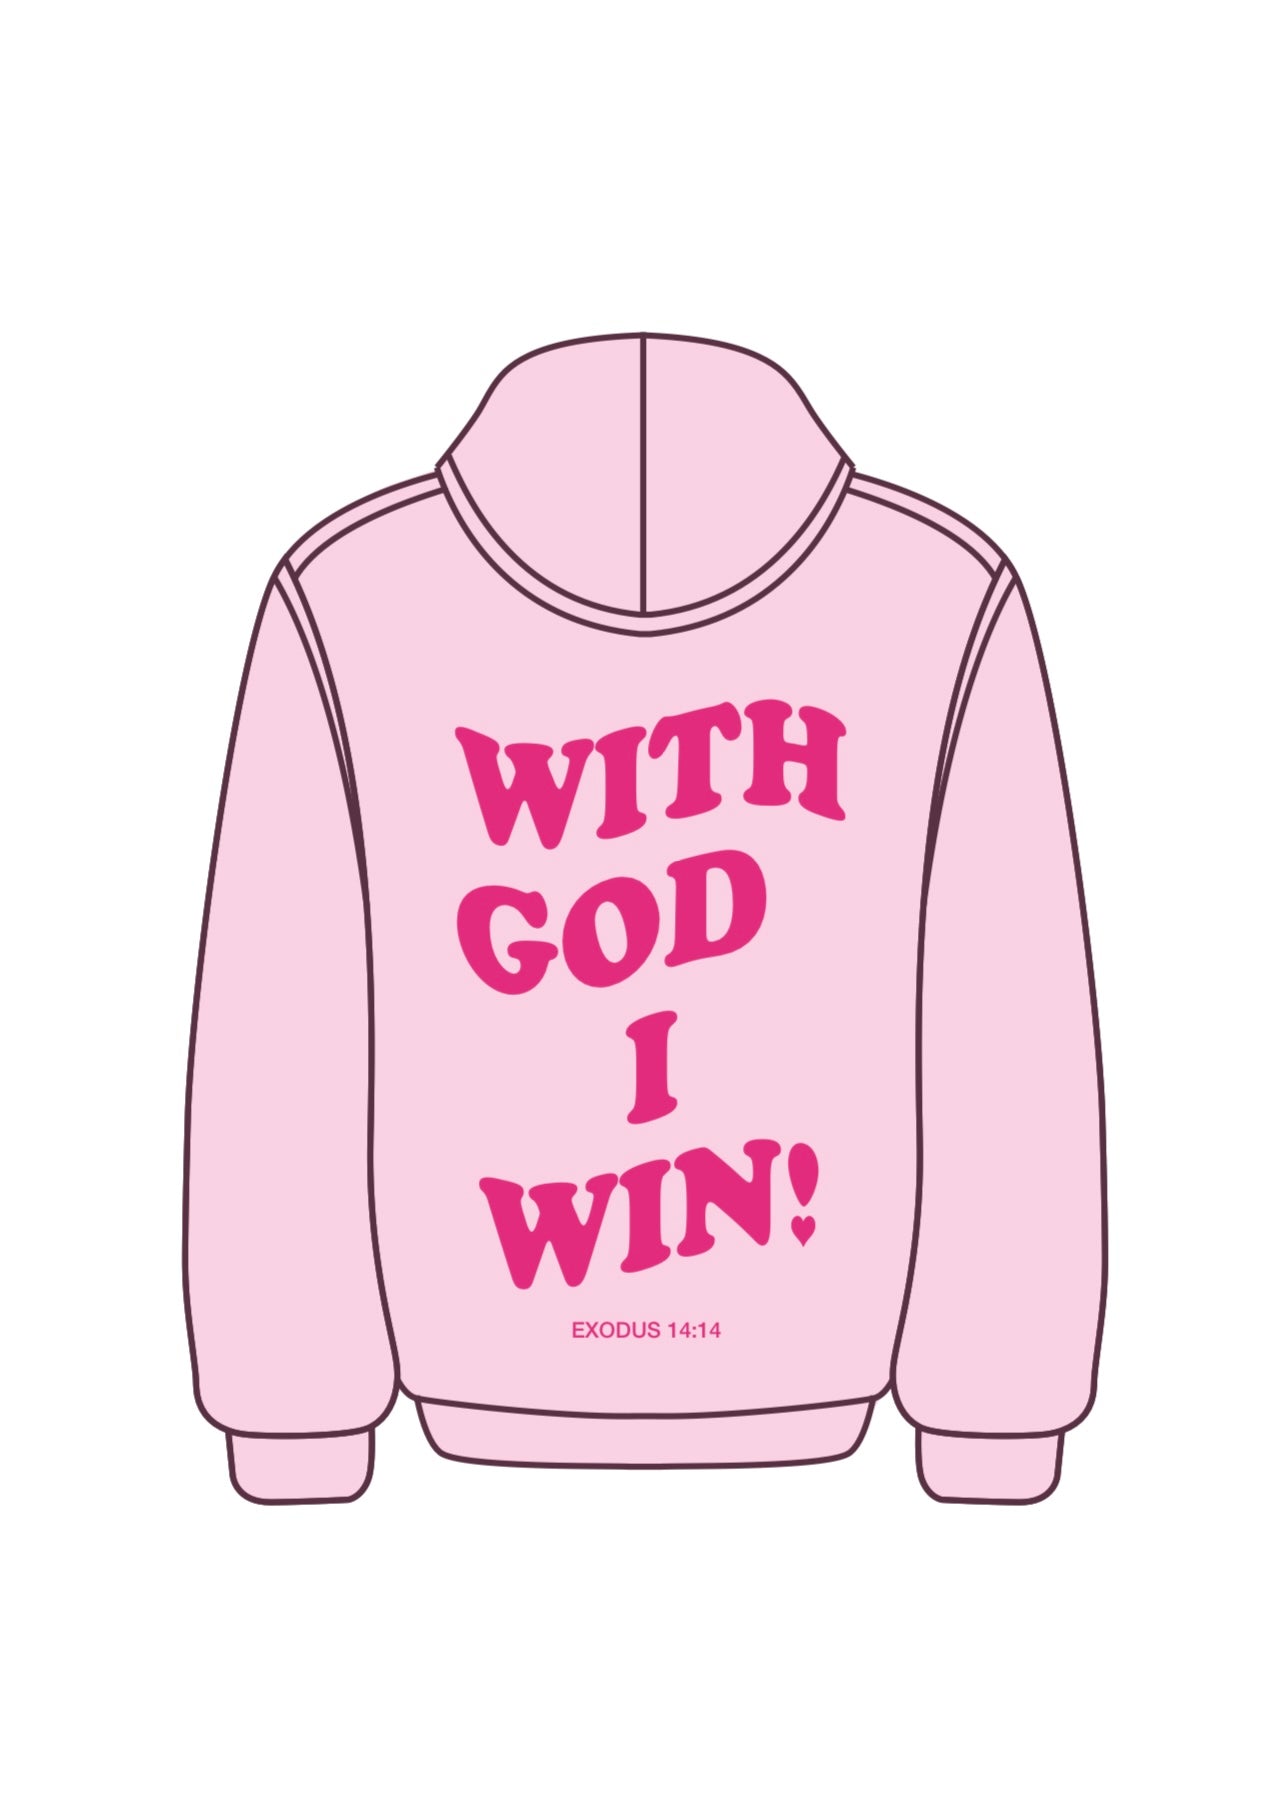 VDAY EDITION - Print Win! Hoodie Puff WGIW I Clothing God, With